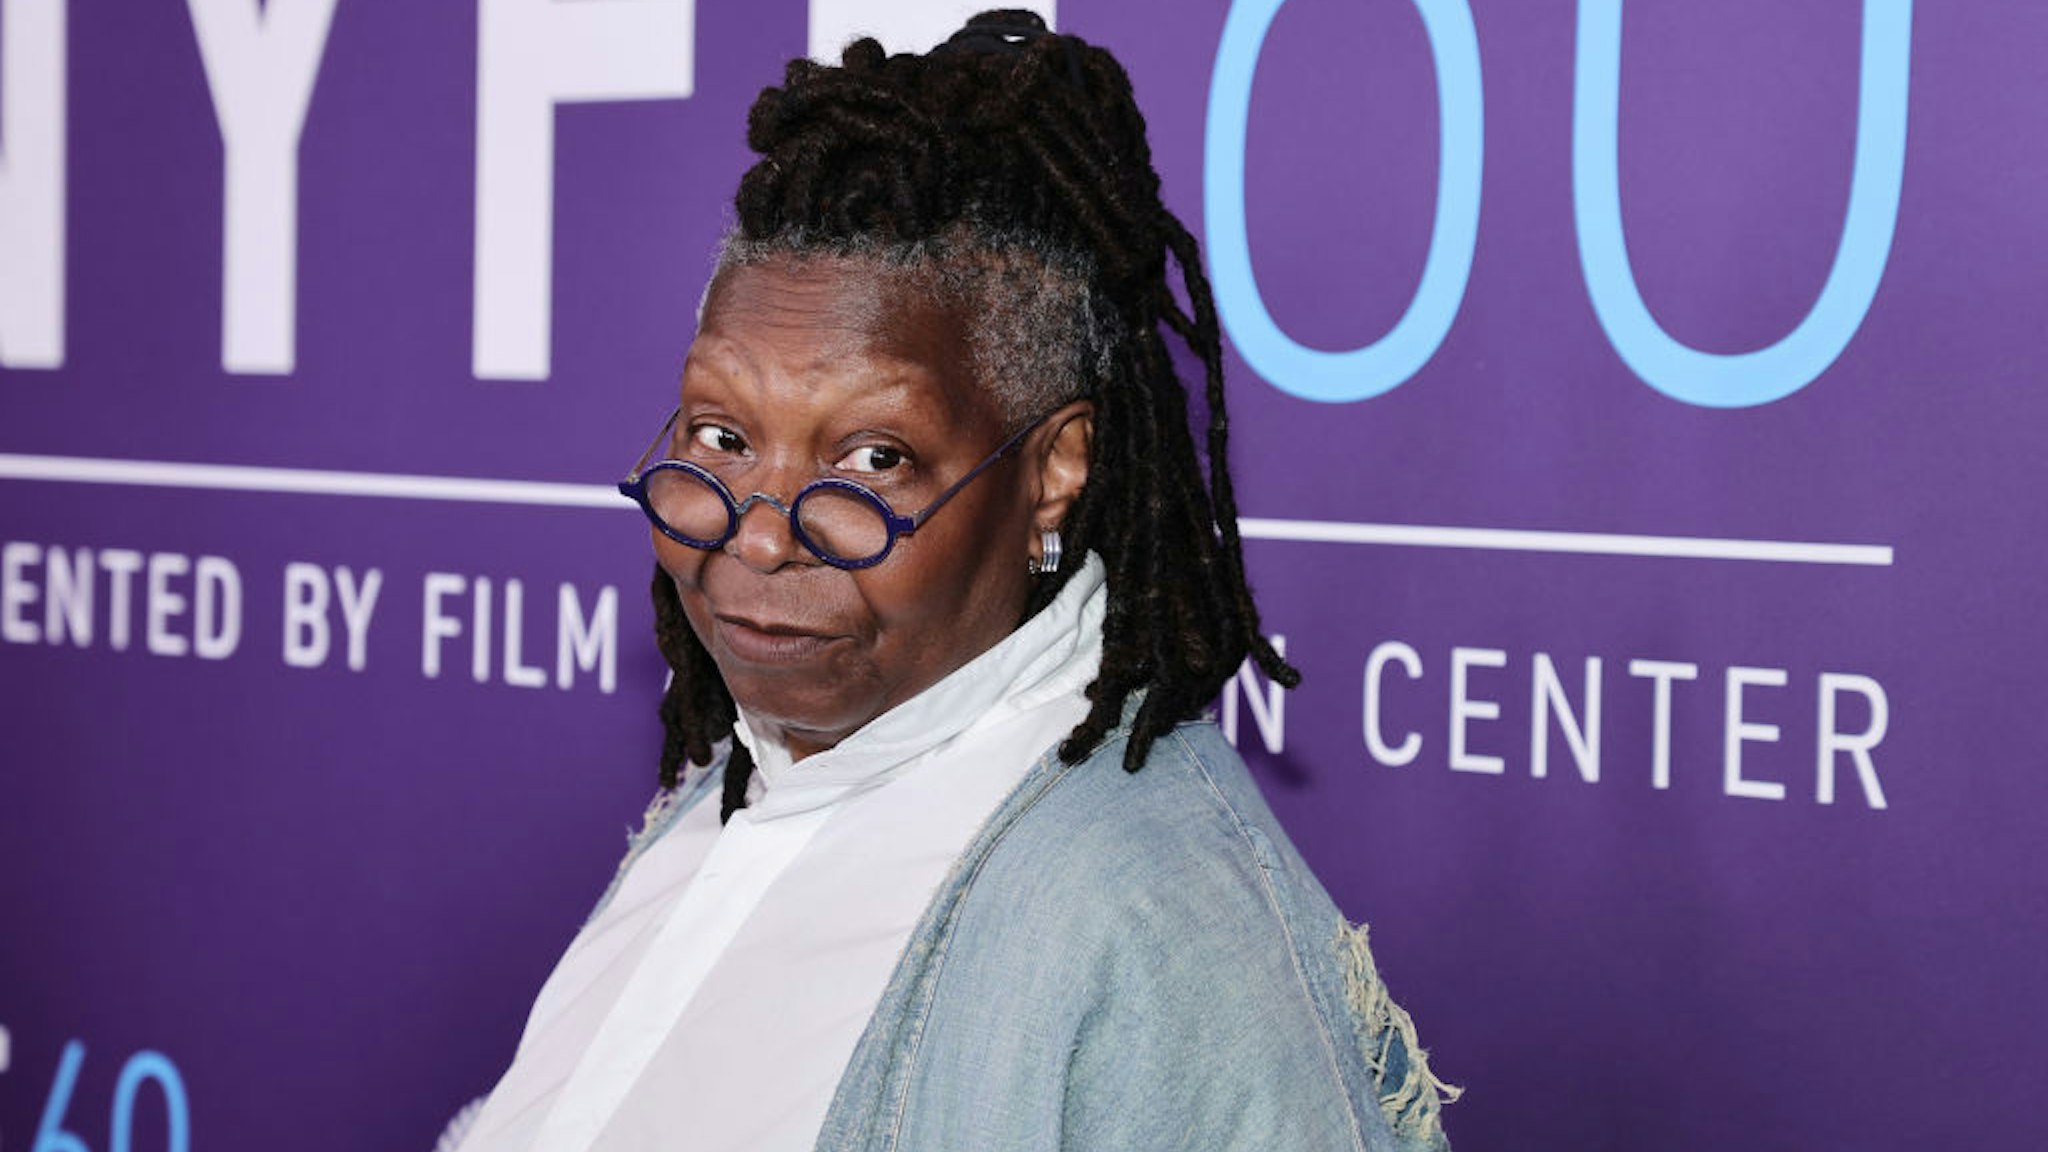 NEW YORK, NEW YORK - OCTOBER 01: Whoopi Goldberg attends the premiere of "Till" during the 60th New York Film Festival at Alice Tully Hall, Lincoln Center on October 01, 2022 in New York City. (Photo by Jamie McCarthy/Getty Images for FLC)